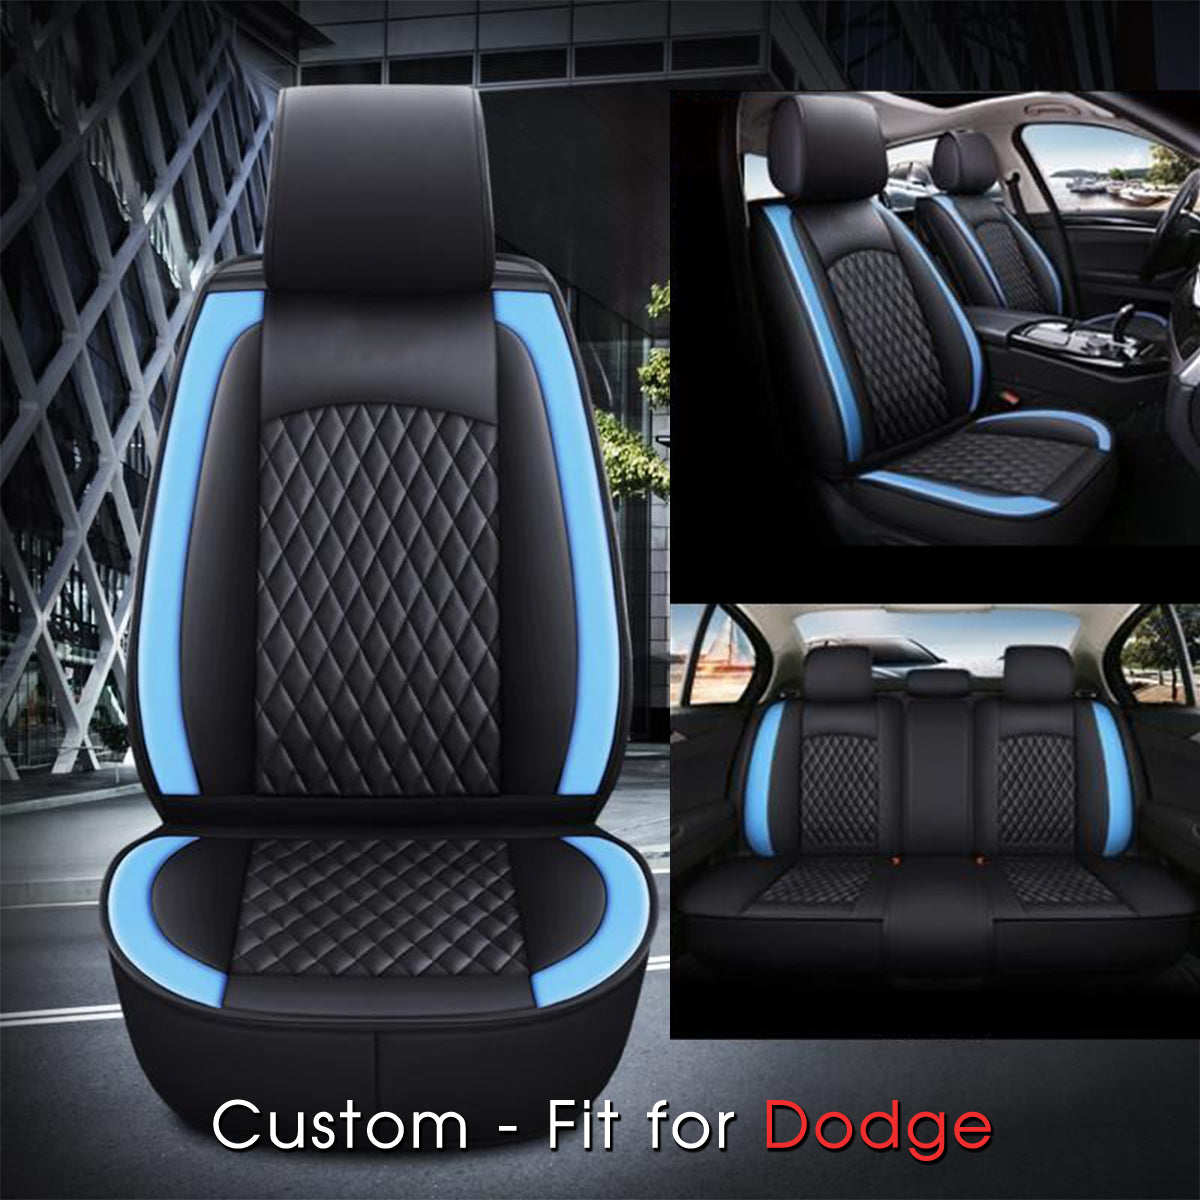 2 Car Seat Covers Full Set, Custom-Fit For Car, Waterproof Leather Front Rear Seat Automotive Protection Cushions, Car Accessories DLDE211